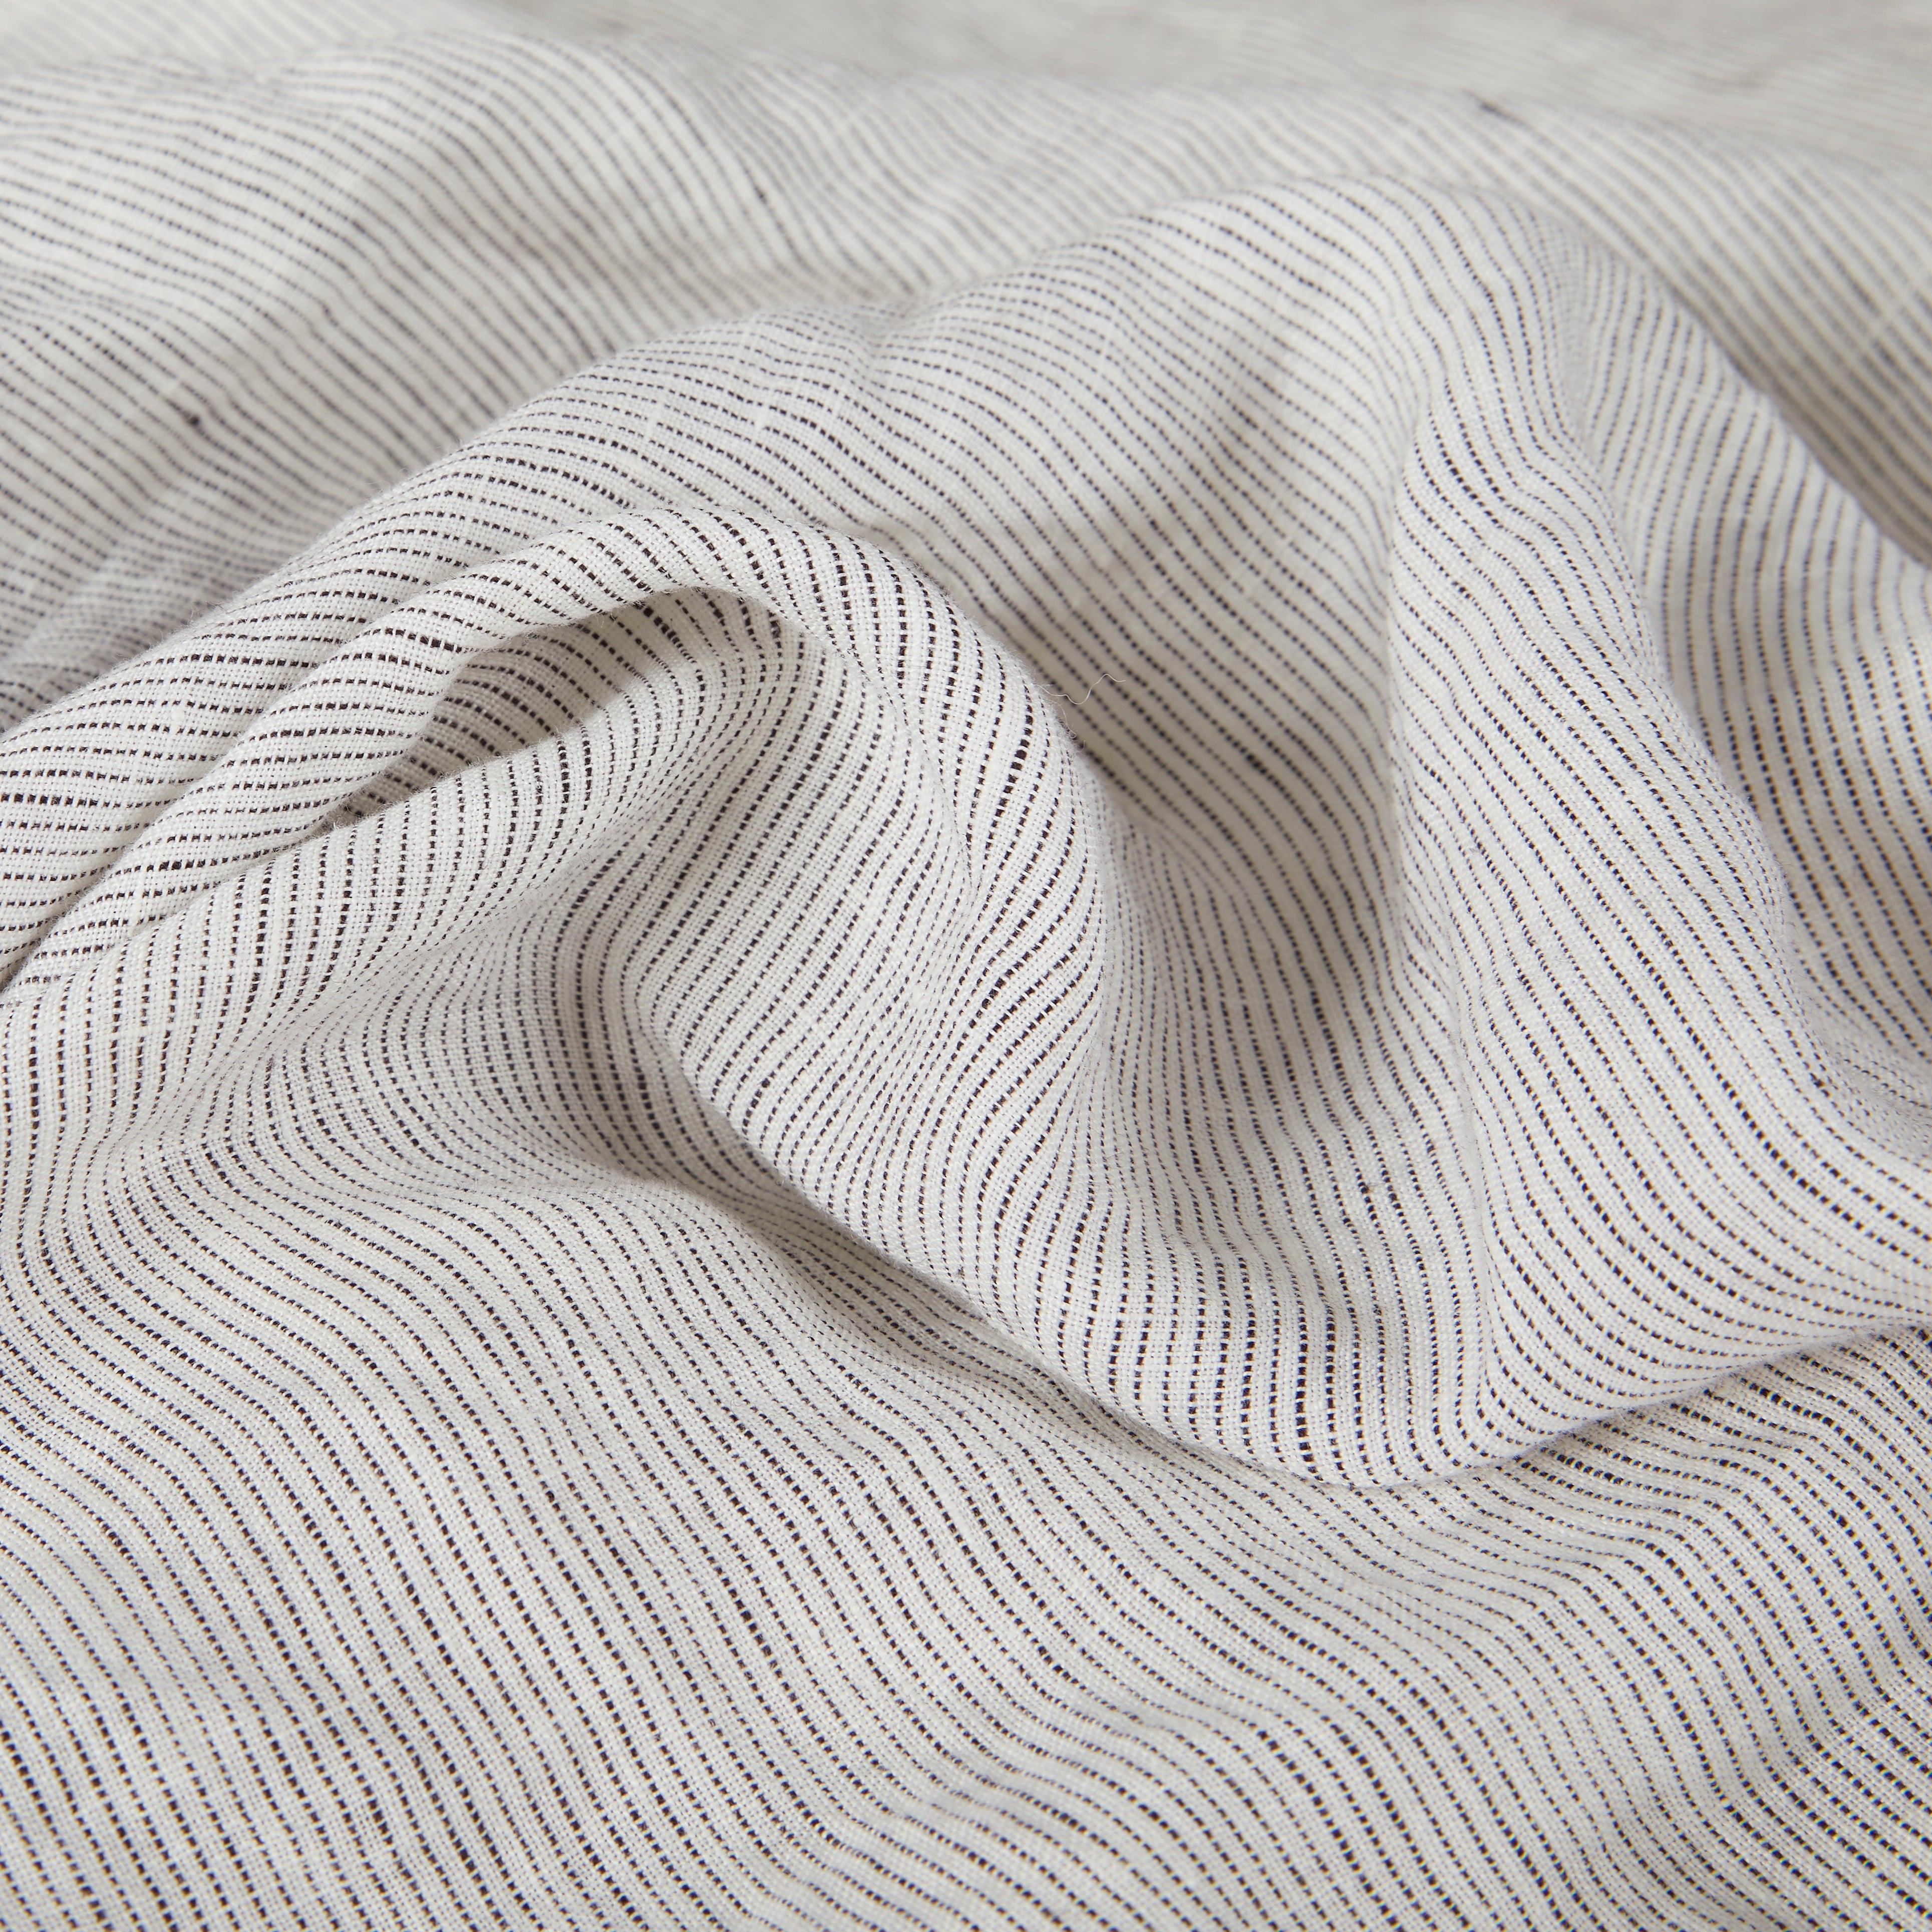 Fabric pattern stonewashed linen in gray and white.